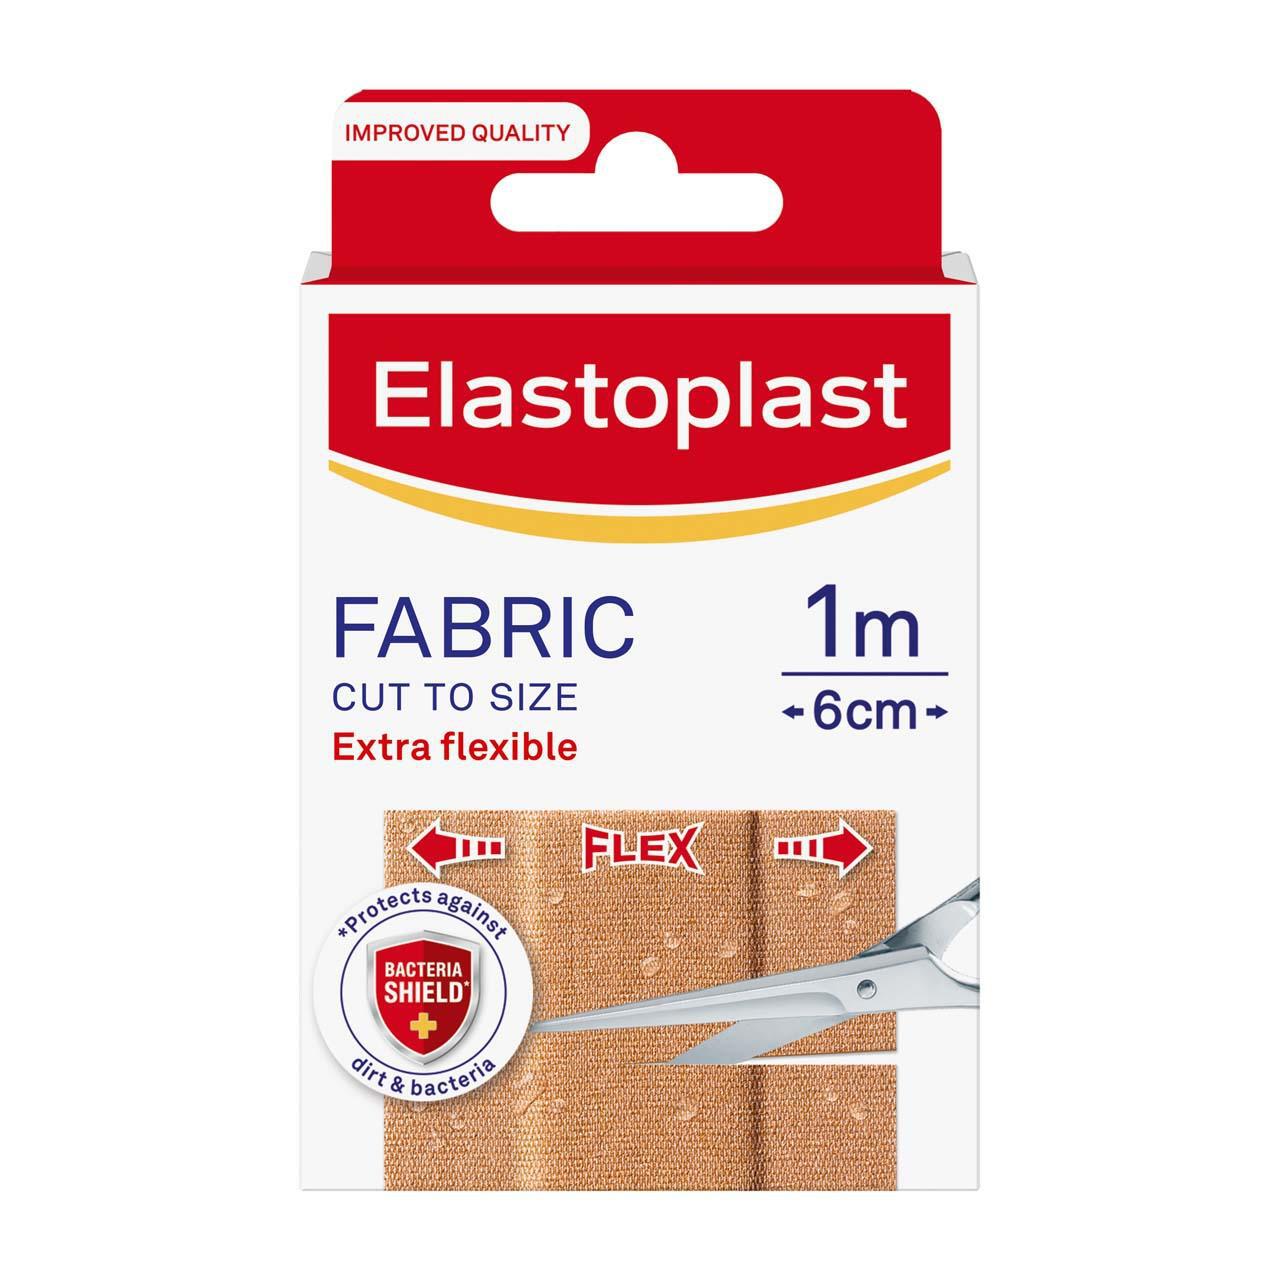 Elastoplast Extra Flexible Cut to Size Breathable Fabric Plaster 1m x 6cm 10 per pack